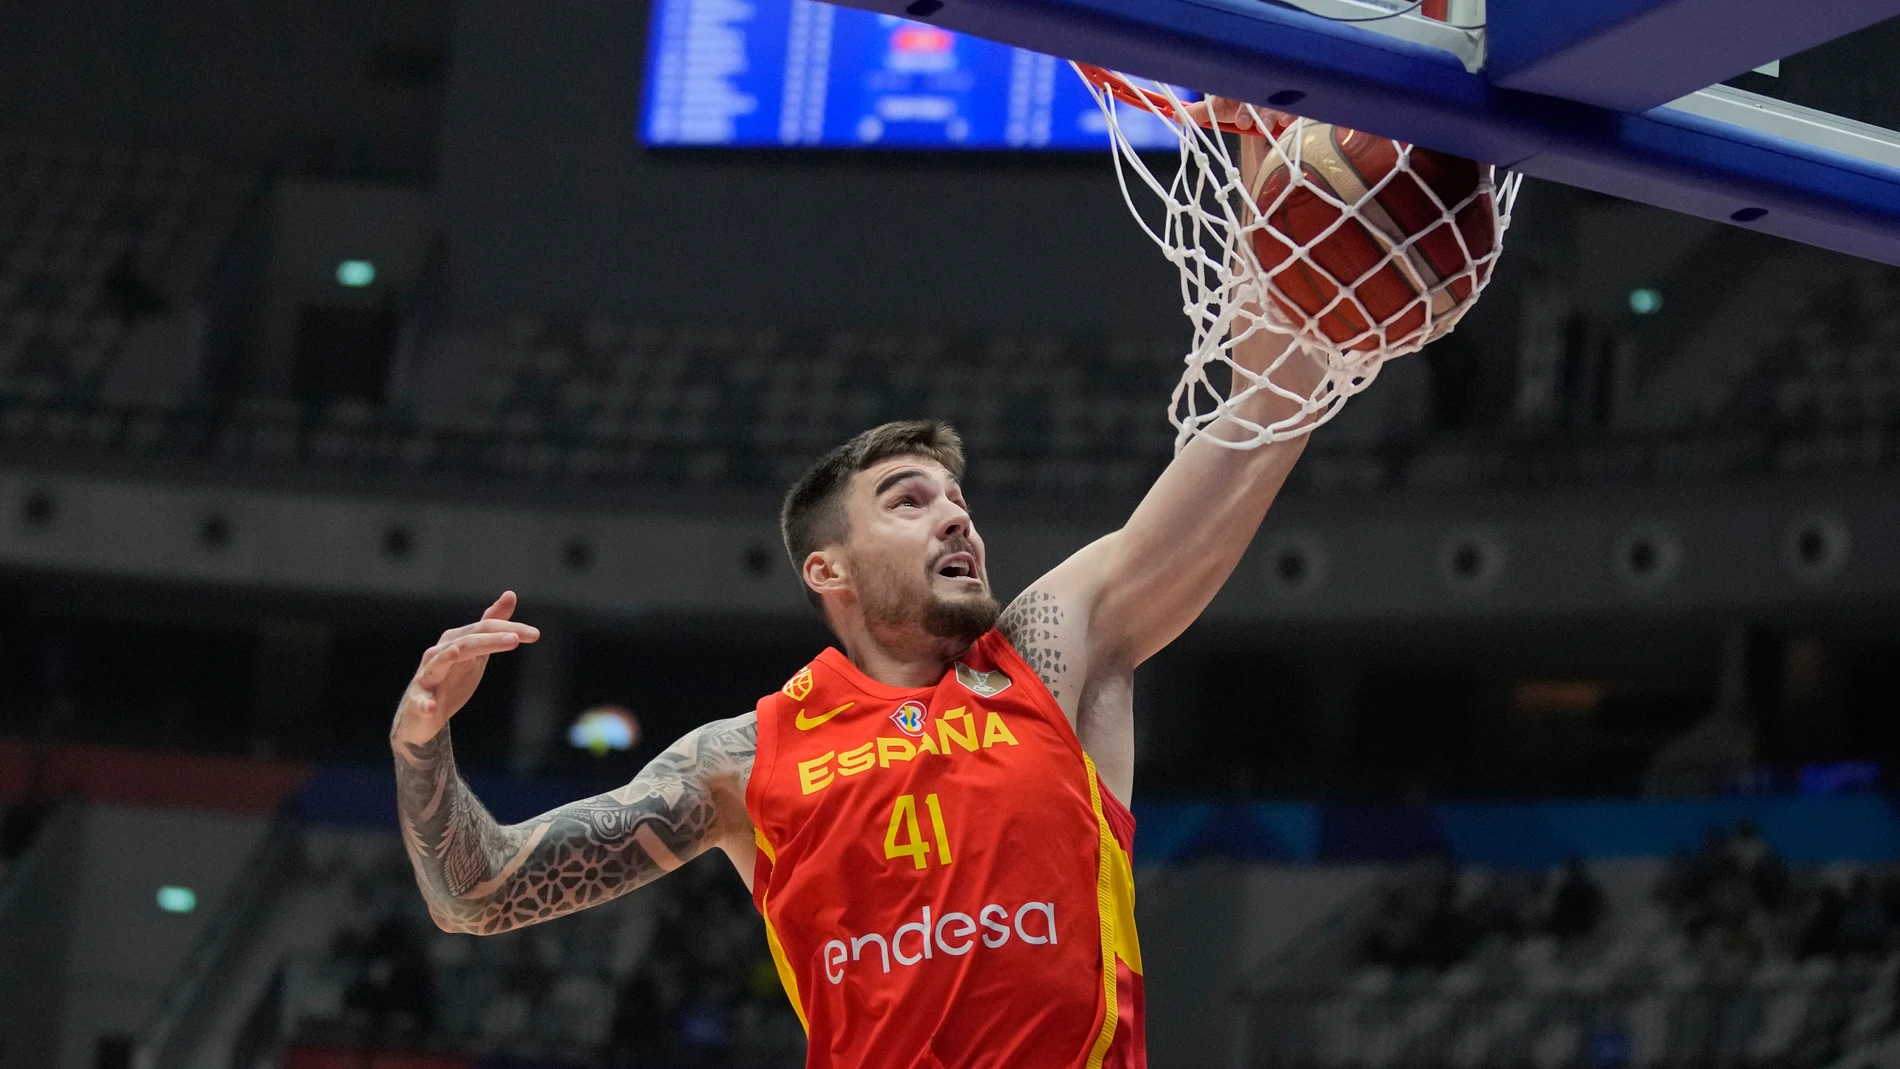 Spain forward Juancho Hernangomez (41) dunks to score against Iran during the Basketball World Cup group G match between Spain and Iran at the Indonesia Arena stadium in Jakarta, Indonesia, Wednesday, Aug. 30, 2023. (AP Photo/Dita Alangkara)